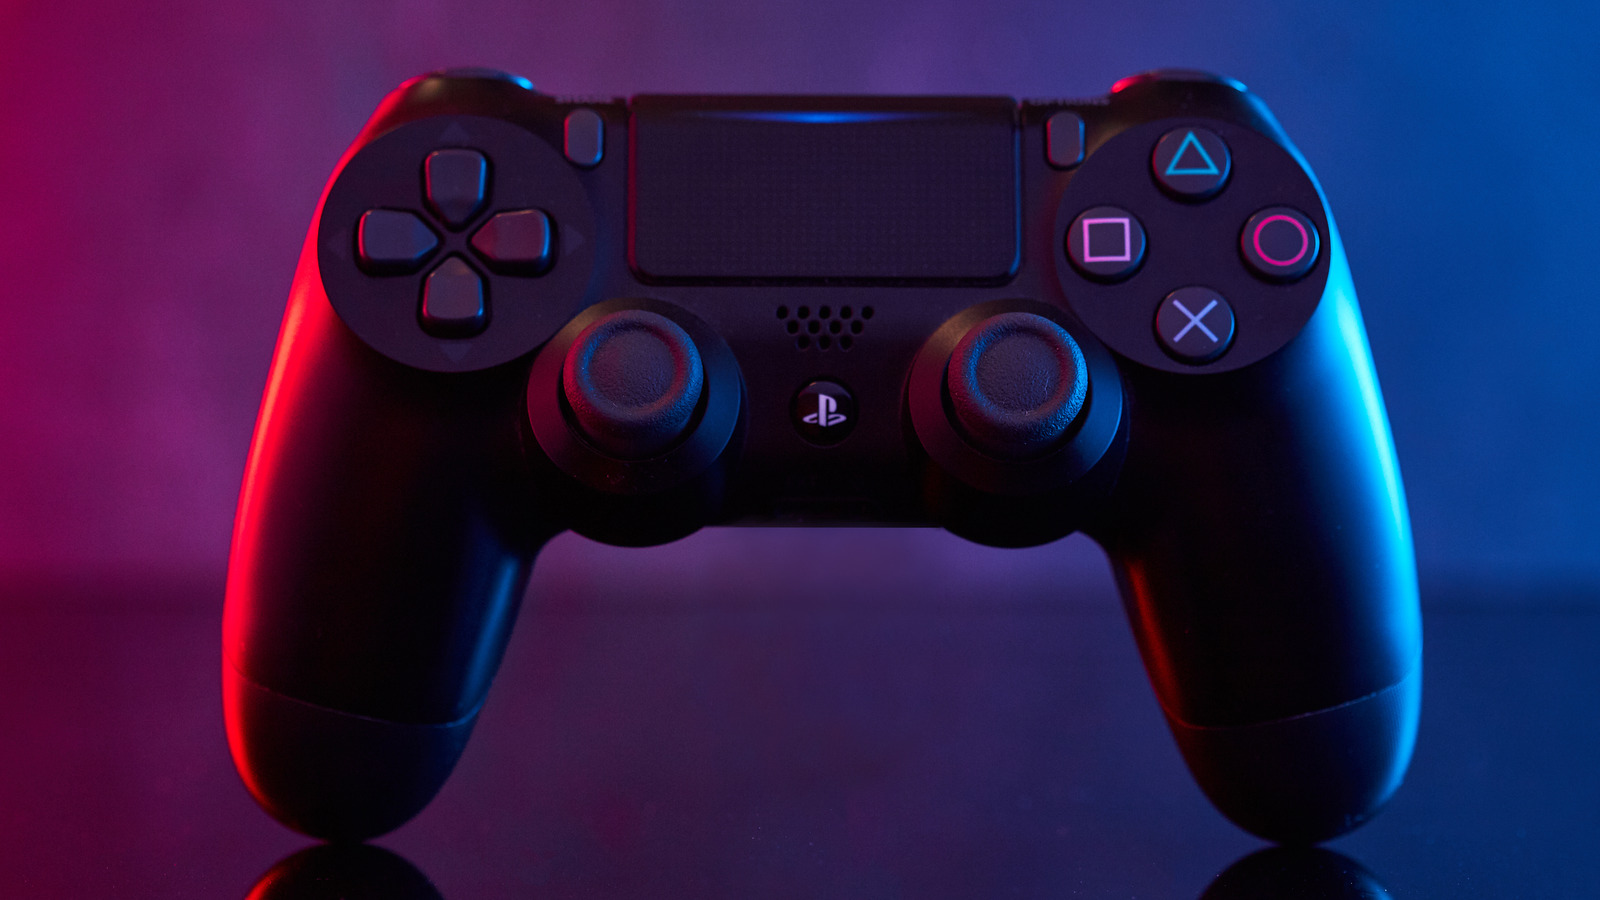 Why Won't My PS4 Update? 3 Ways to Fix a PS4 That Won't Update